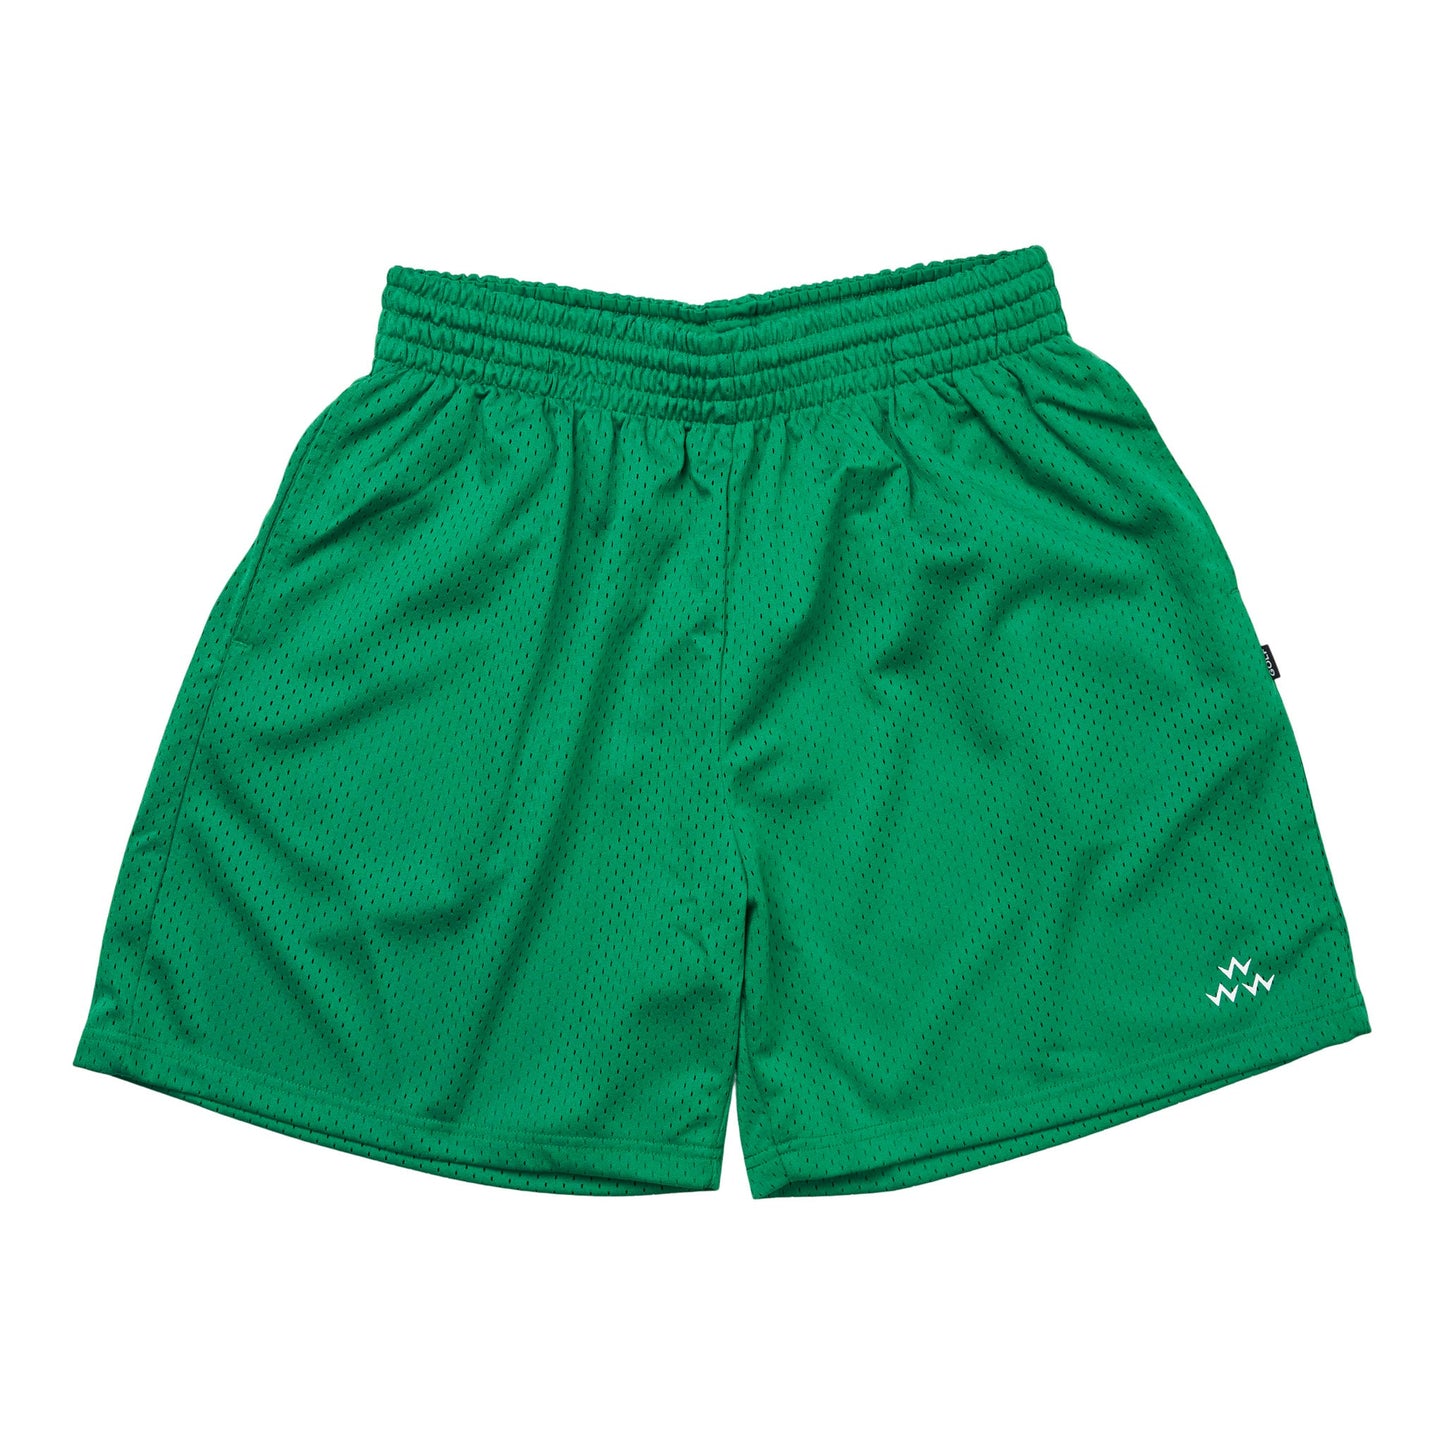 birds-of-condor-green-swing-easy-golf-club-happy-place-champions-fifa-world-cup-football-mesh-basketball-shorts-front